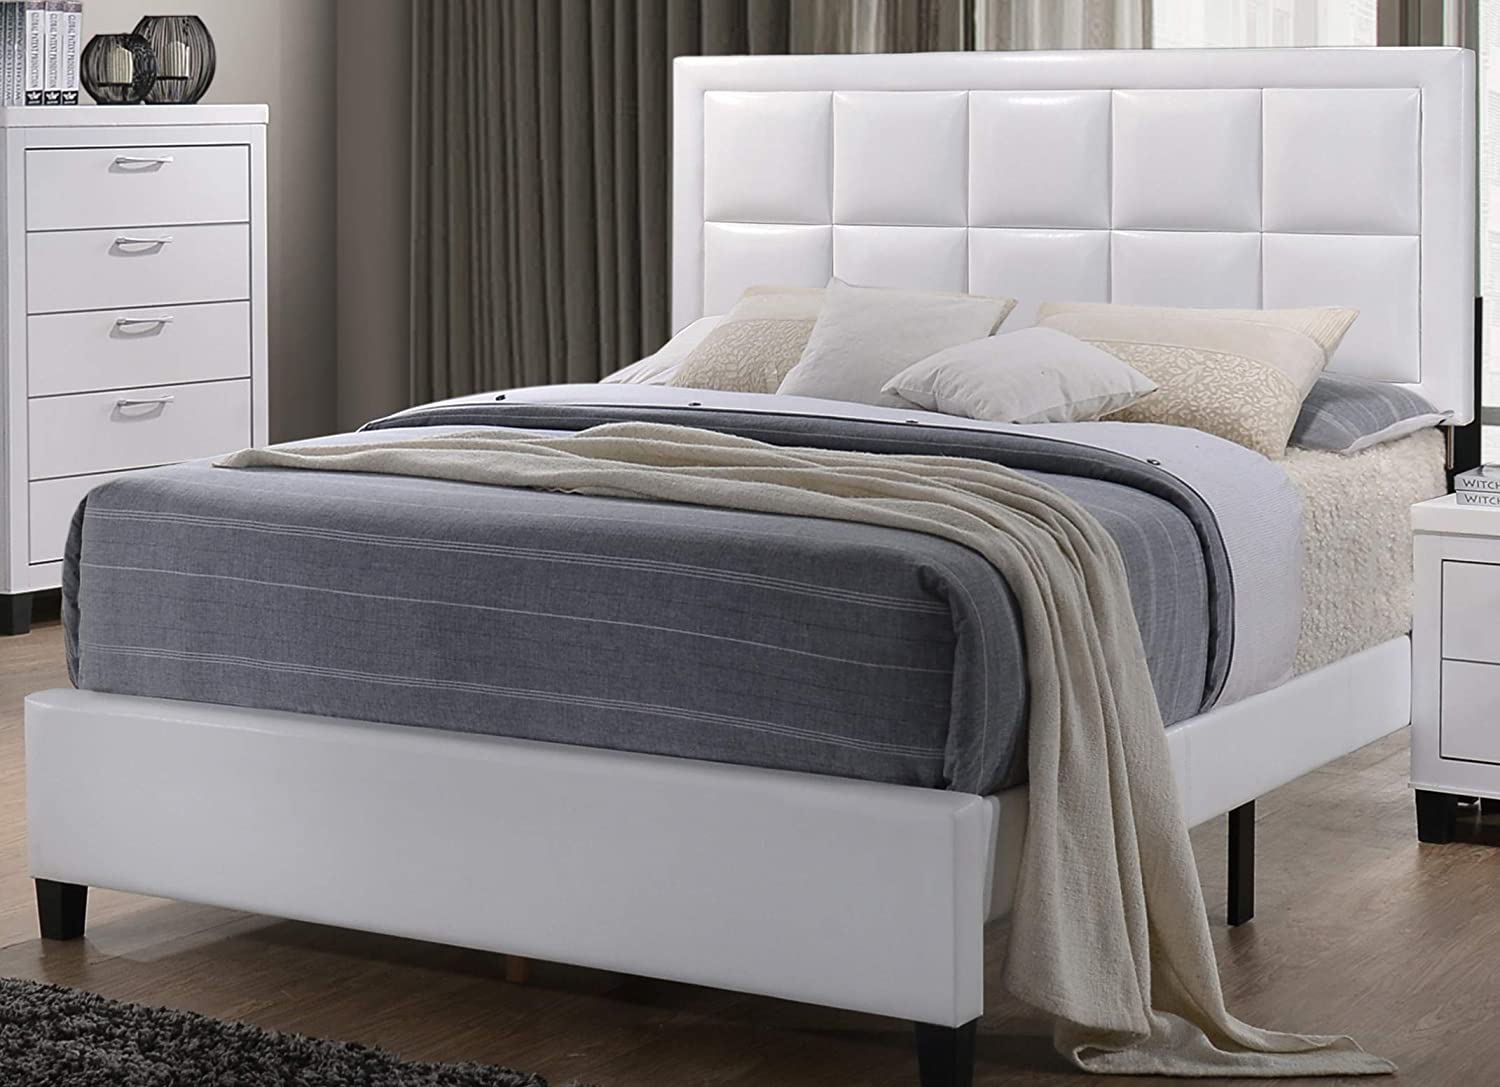 GTU Furniture Contemporary Styling White 4Pc Queen Bedroom Set - image 5 of 5